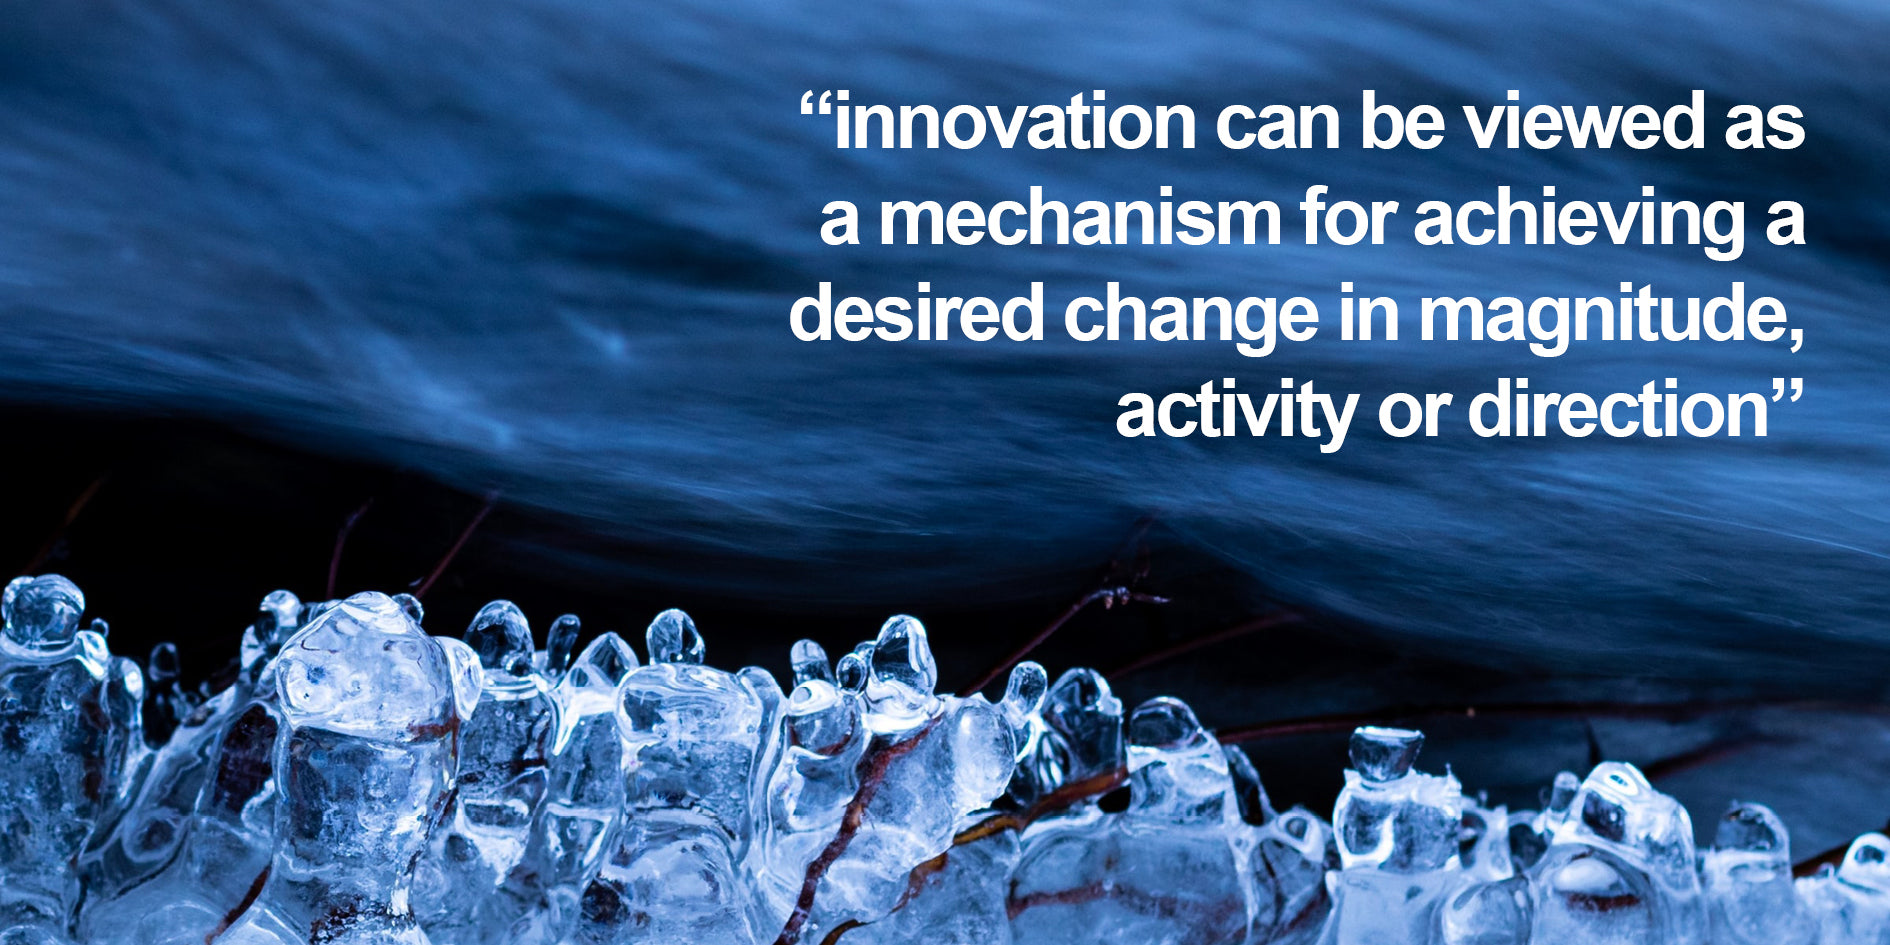 innovation can be viewed as a mechanism for achieving a desired change in magnitude, activity or direction